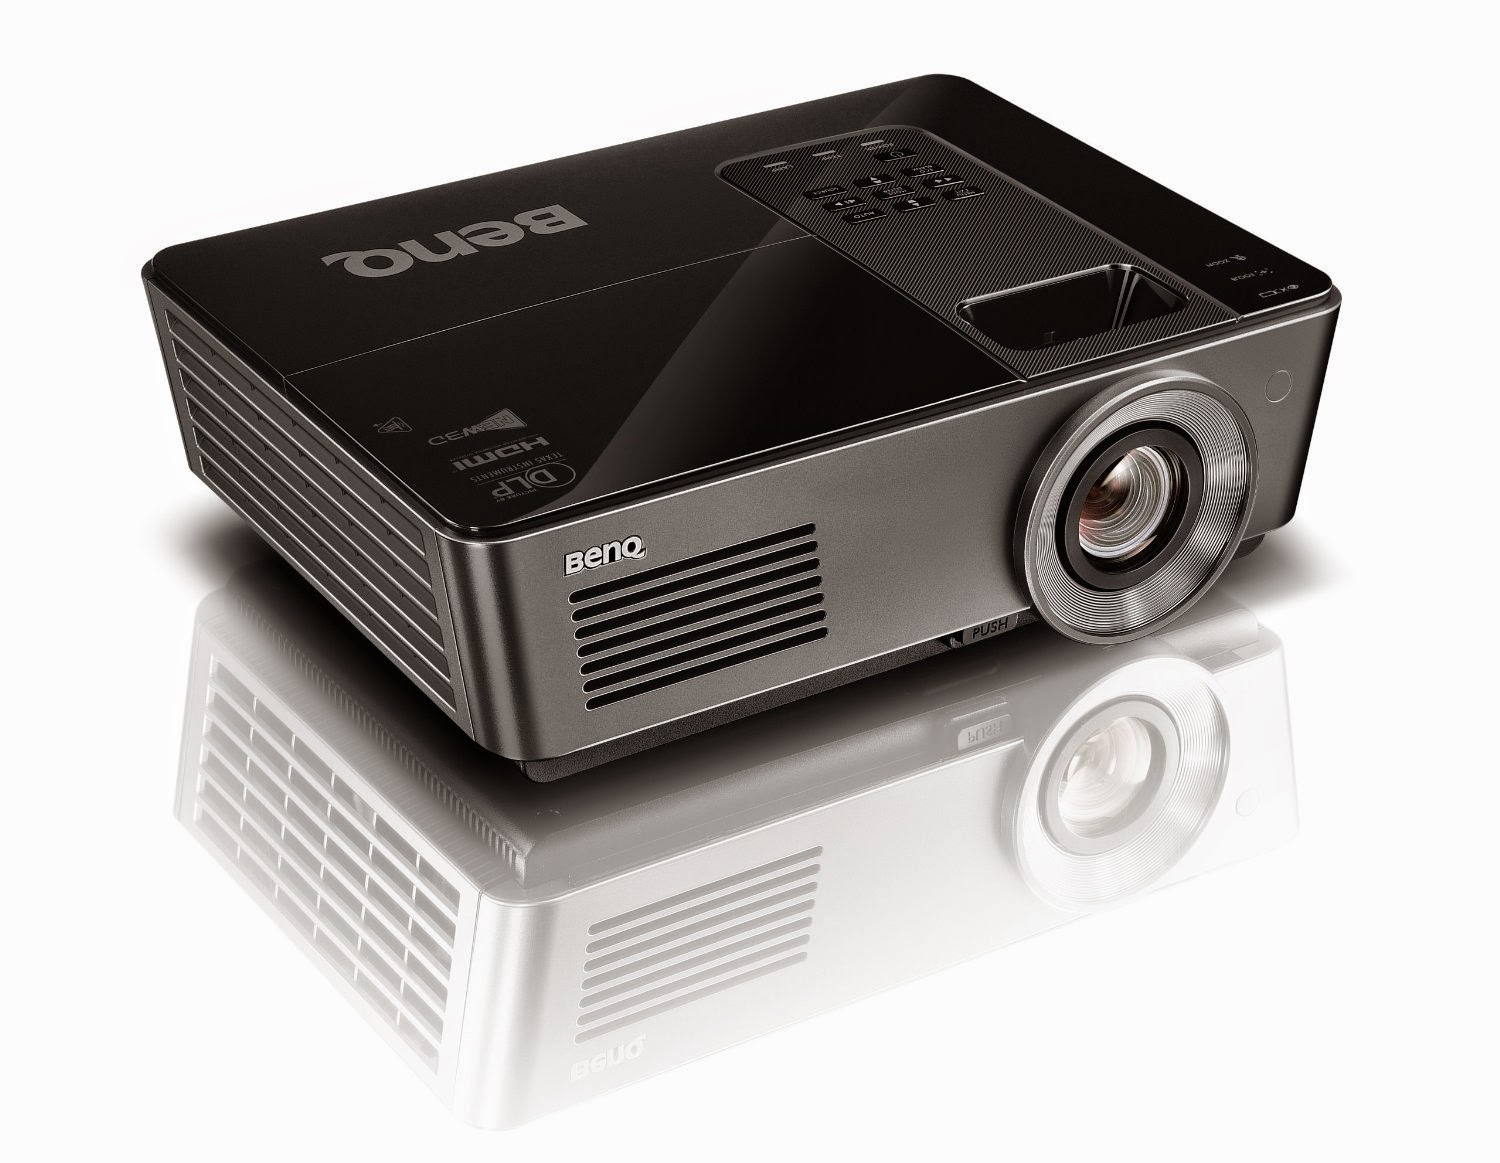 Lcd Versus BenQ SH915 1080p 4000 Lumens Full HD 3D Ready Projector with HDMI Projector